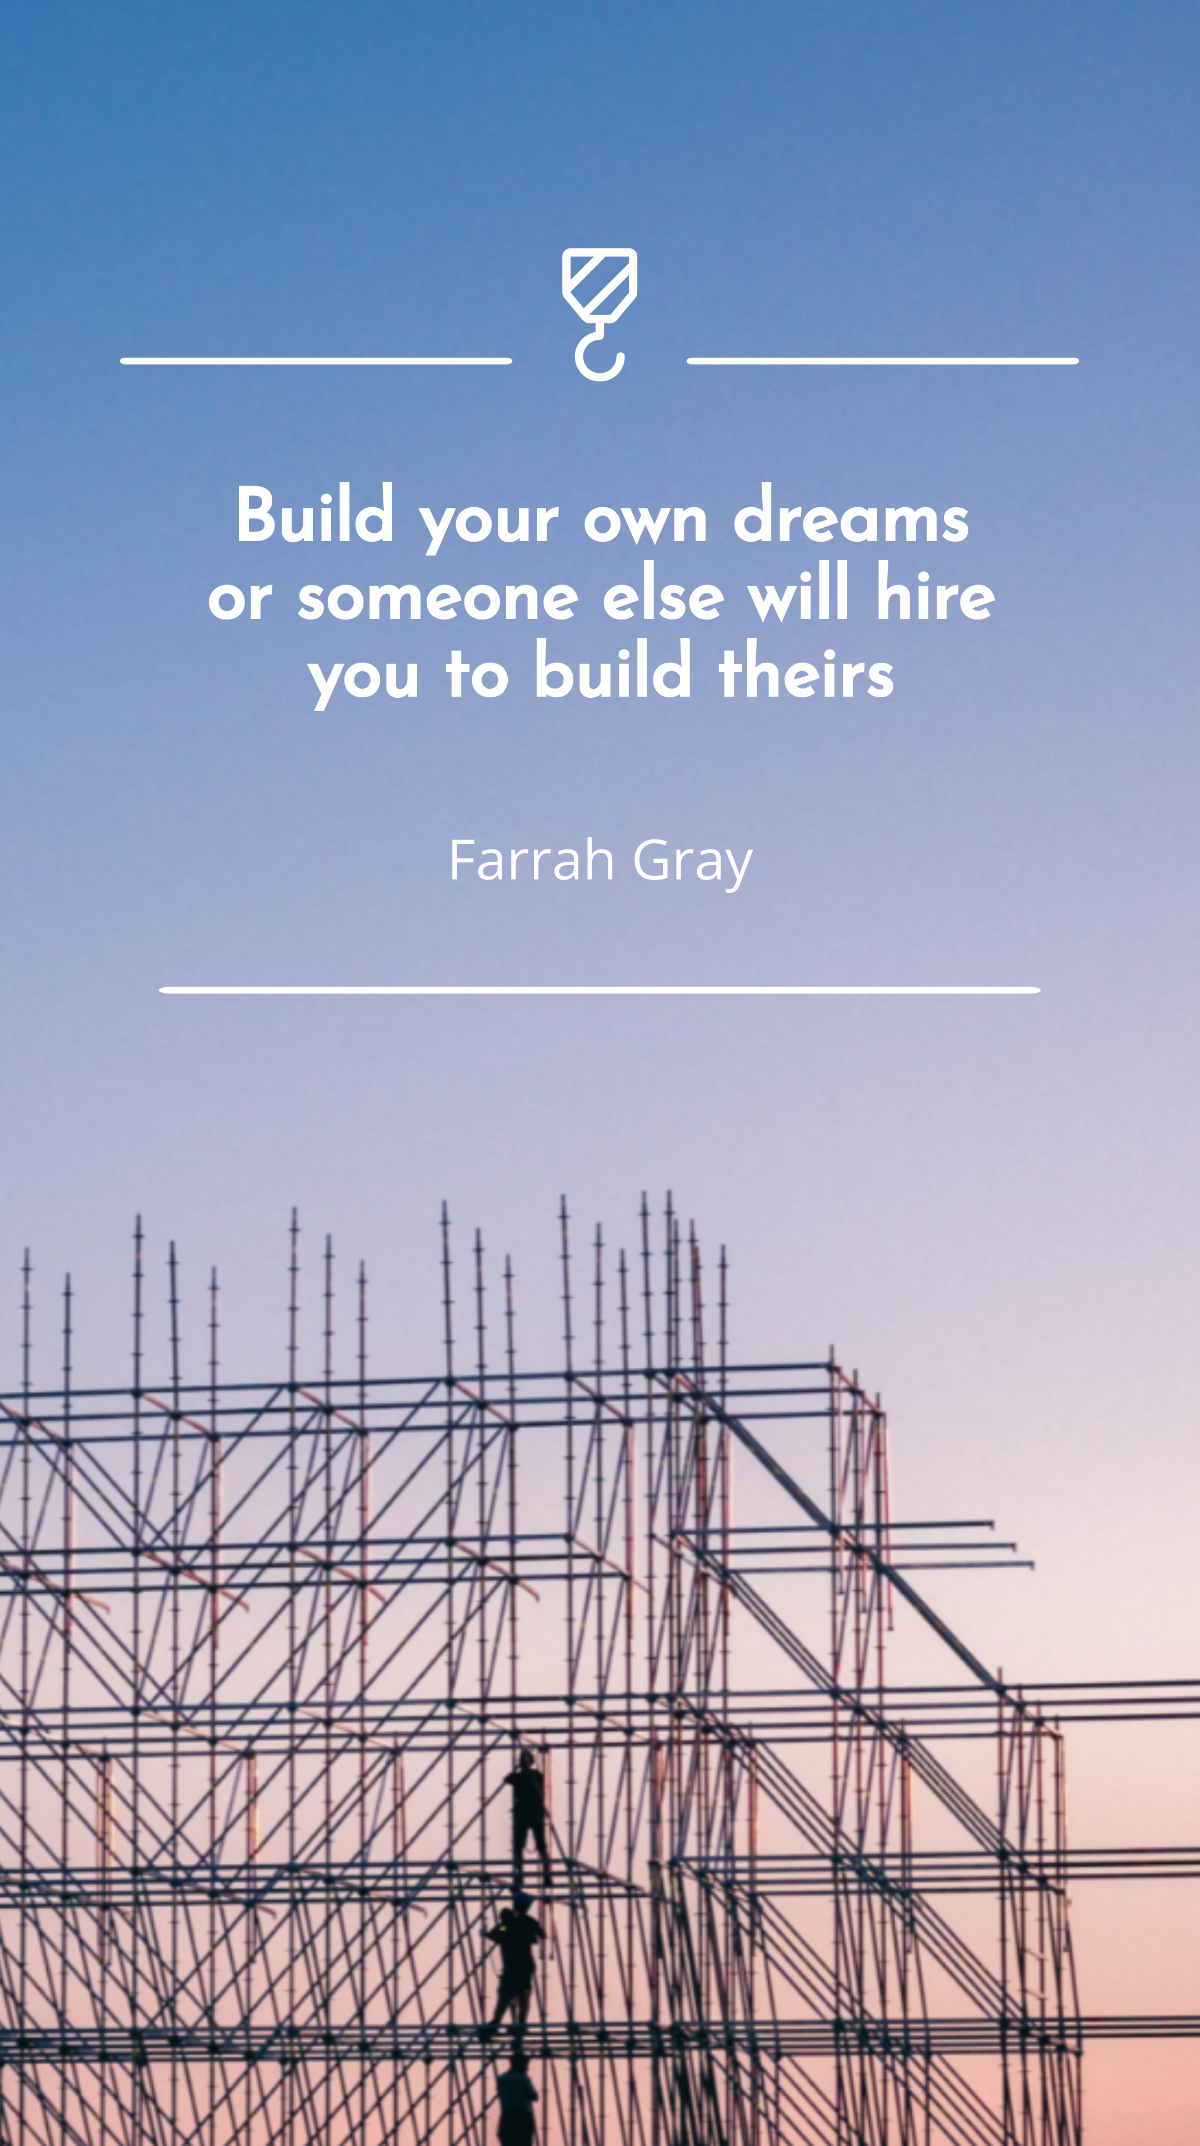 Farrah Gray - Build your own dreams or someone else will hire you to build theirs. Template